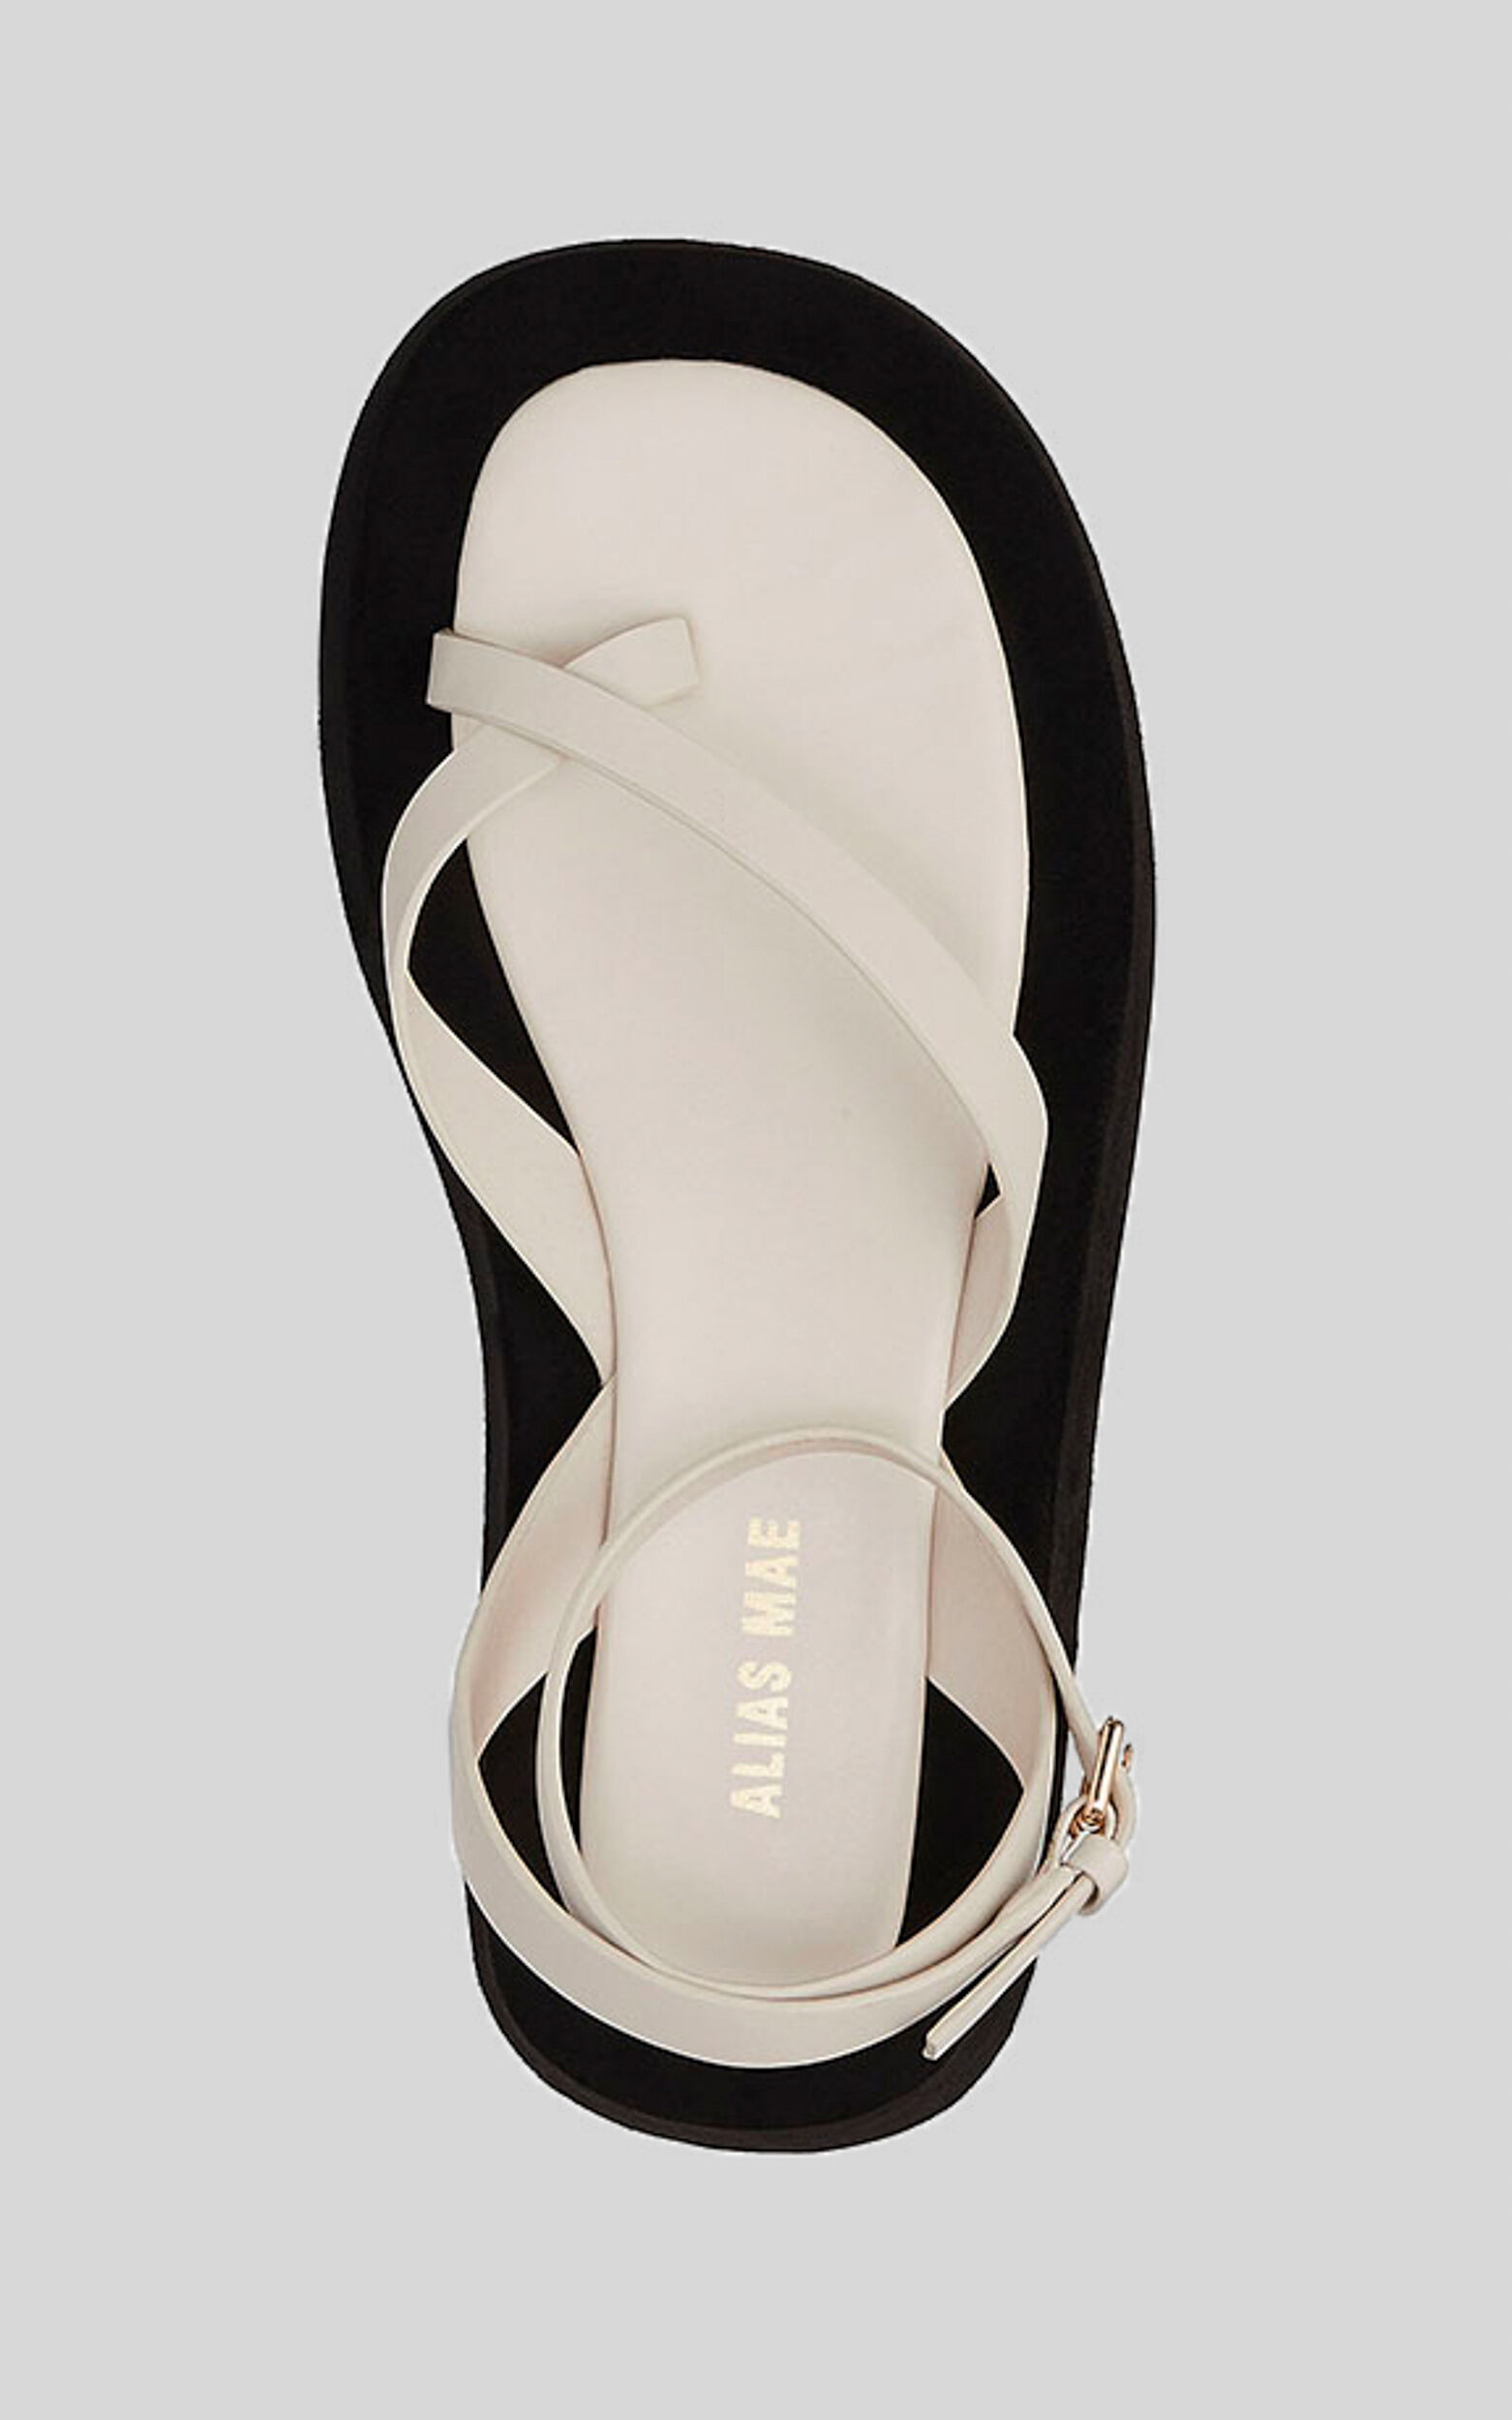 Alias Mae - Polly Sandals in Bone Leather - 05, BRN2, super-hi-res image number null